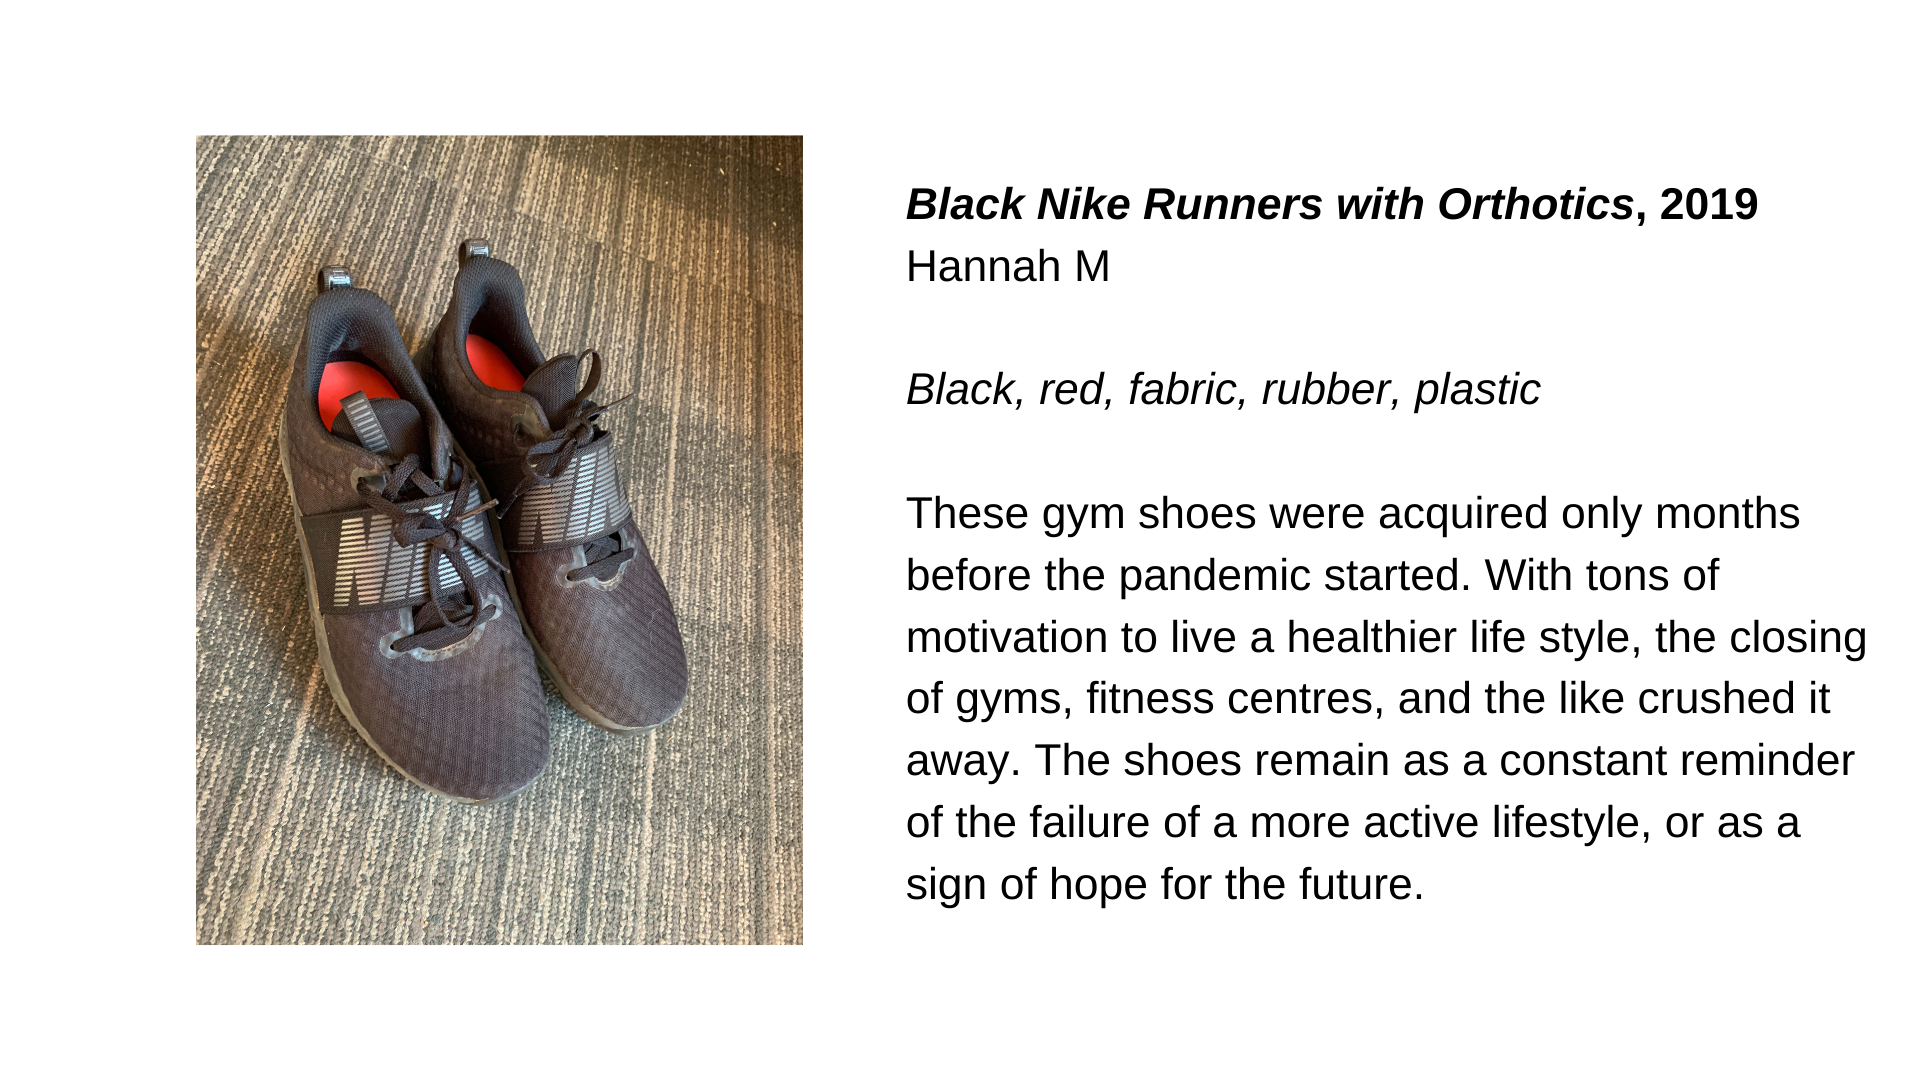  A pair of dark coloured runners with red inserts. Next to this, the text “Black Nike Runners with Orthotics, 2019 - Hannah M. Black, red, fabric, rubber, plastic. These gym shoes were acquired only months before the pandemic started. With tons of mo